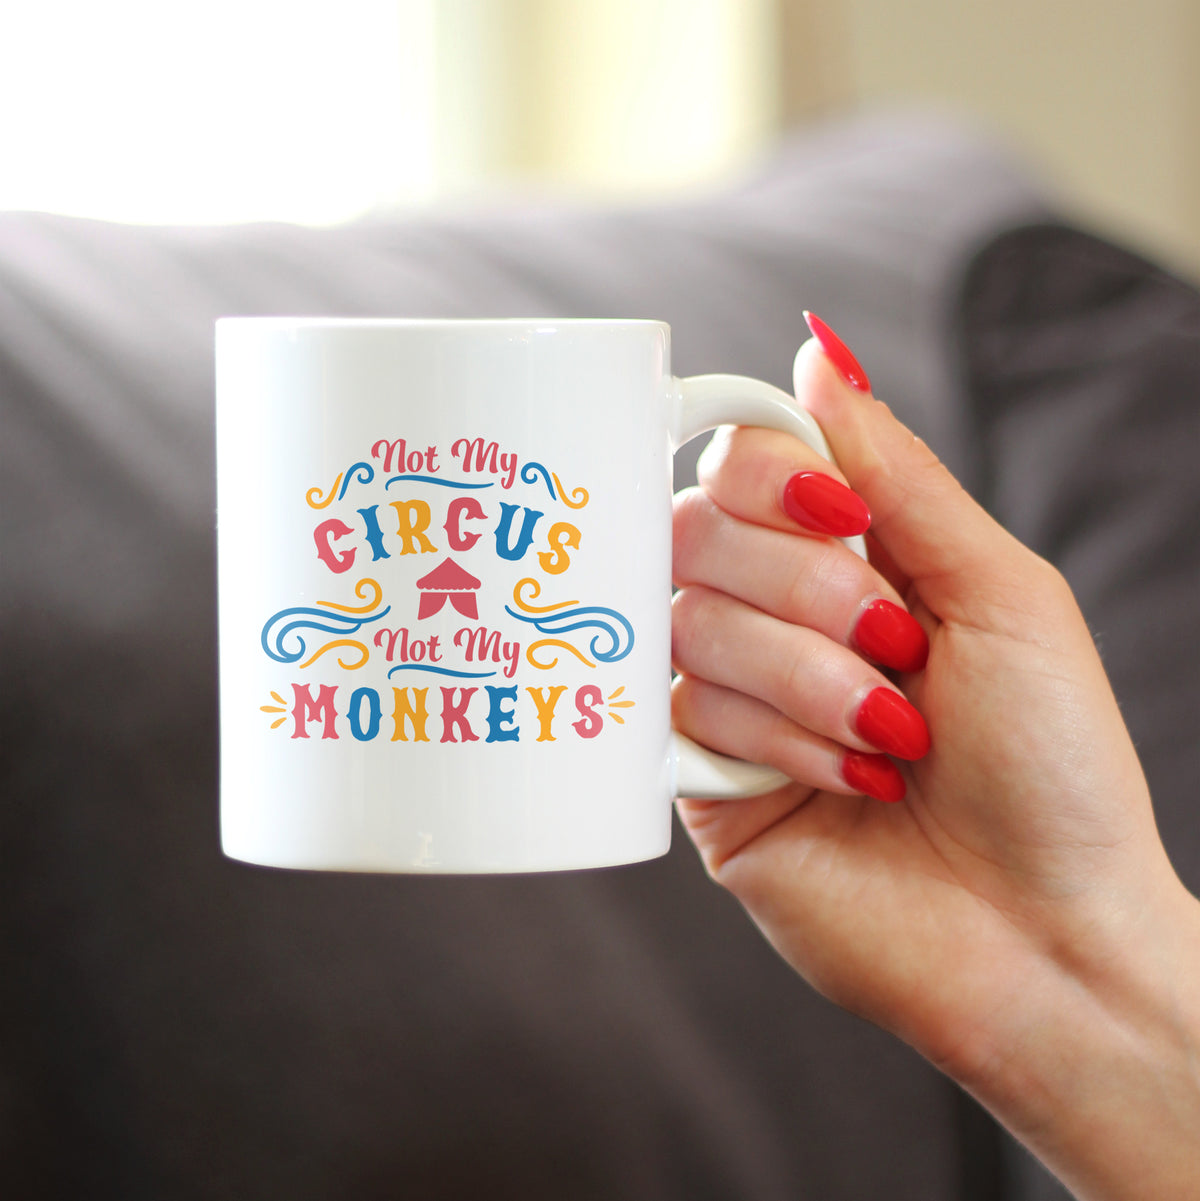 Not My Circus Not My Monkeys Coffee Mug - Fun Retirement Gift For Coworkers